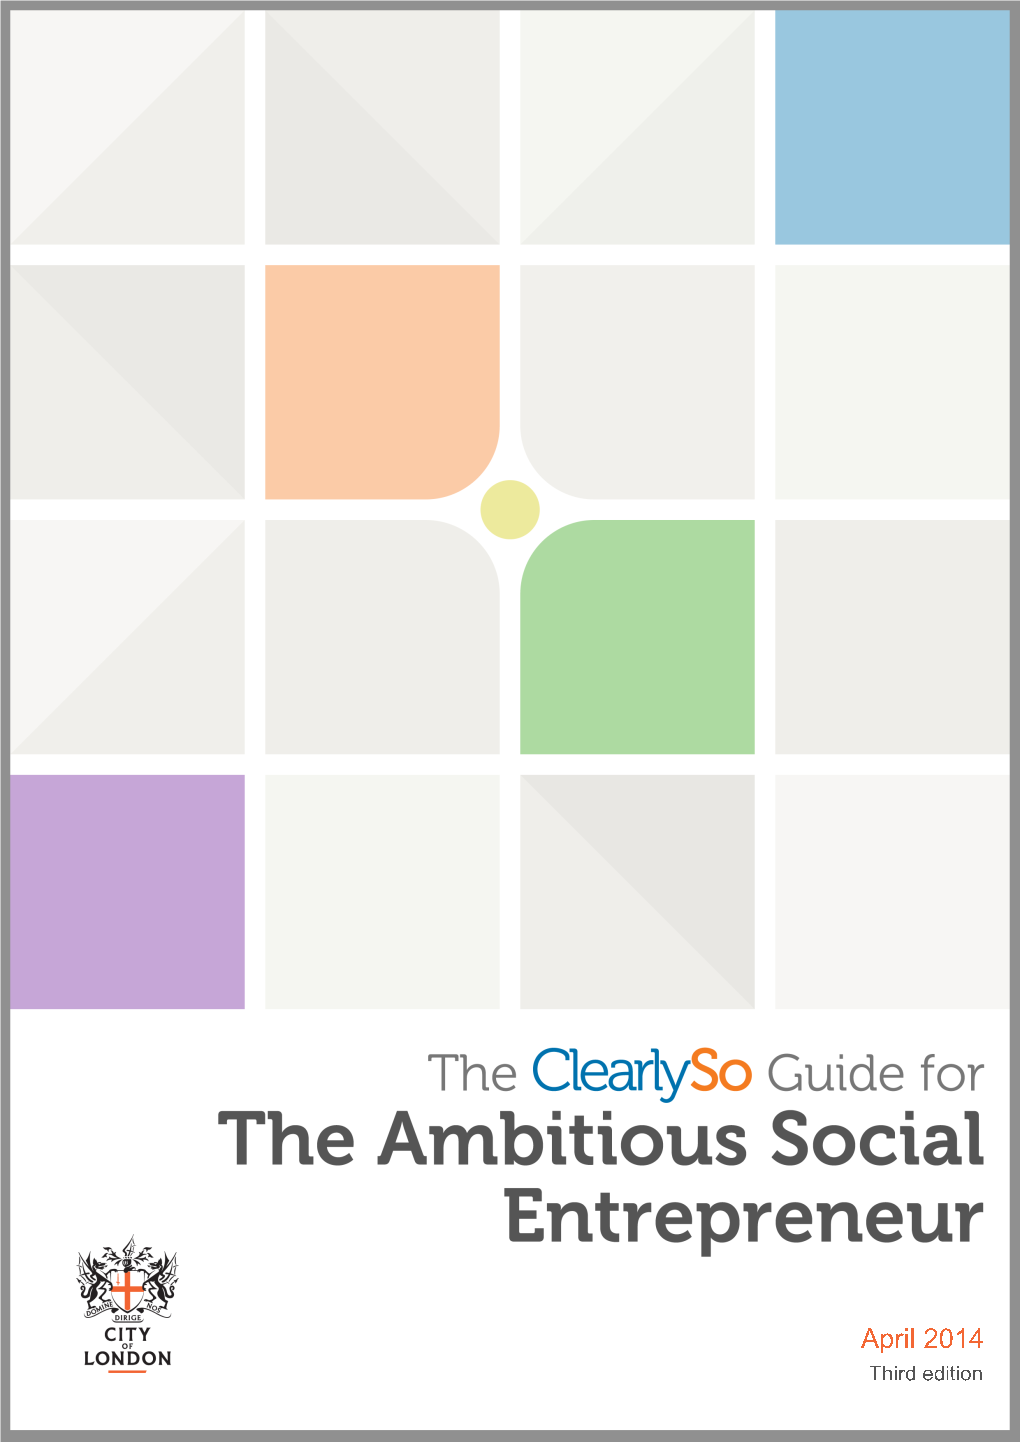 Clearlyso Guide for the Ambitious